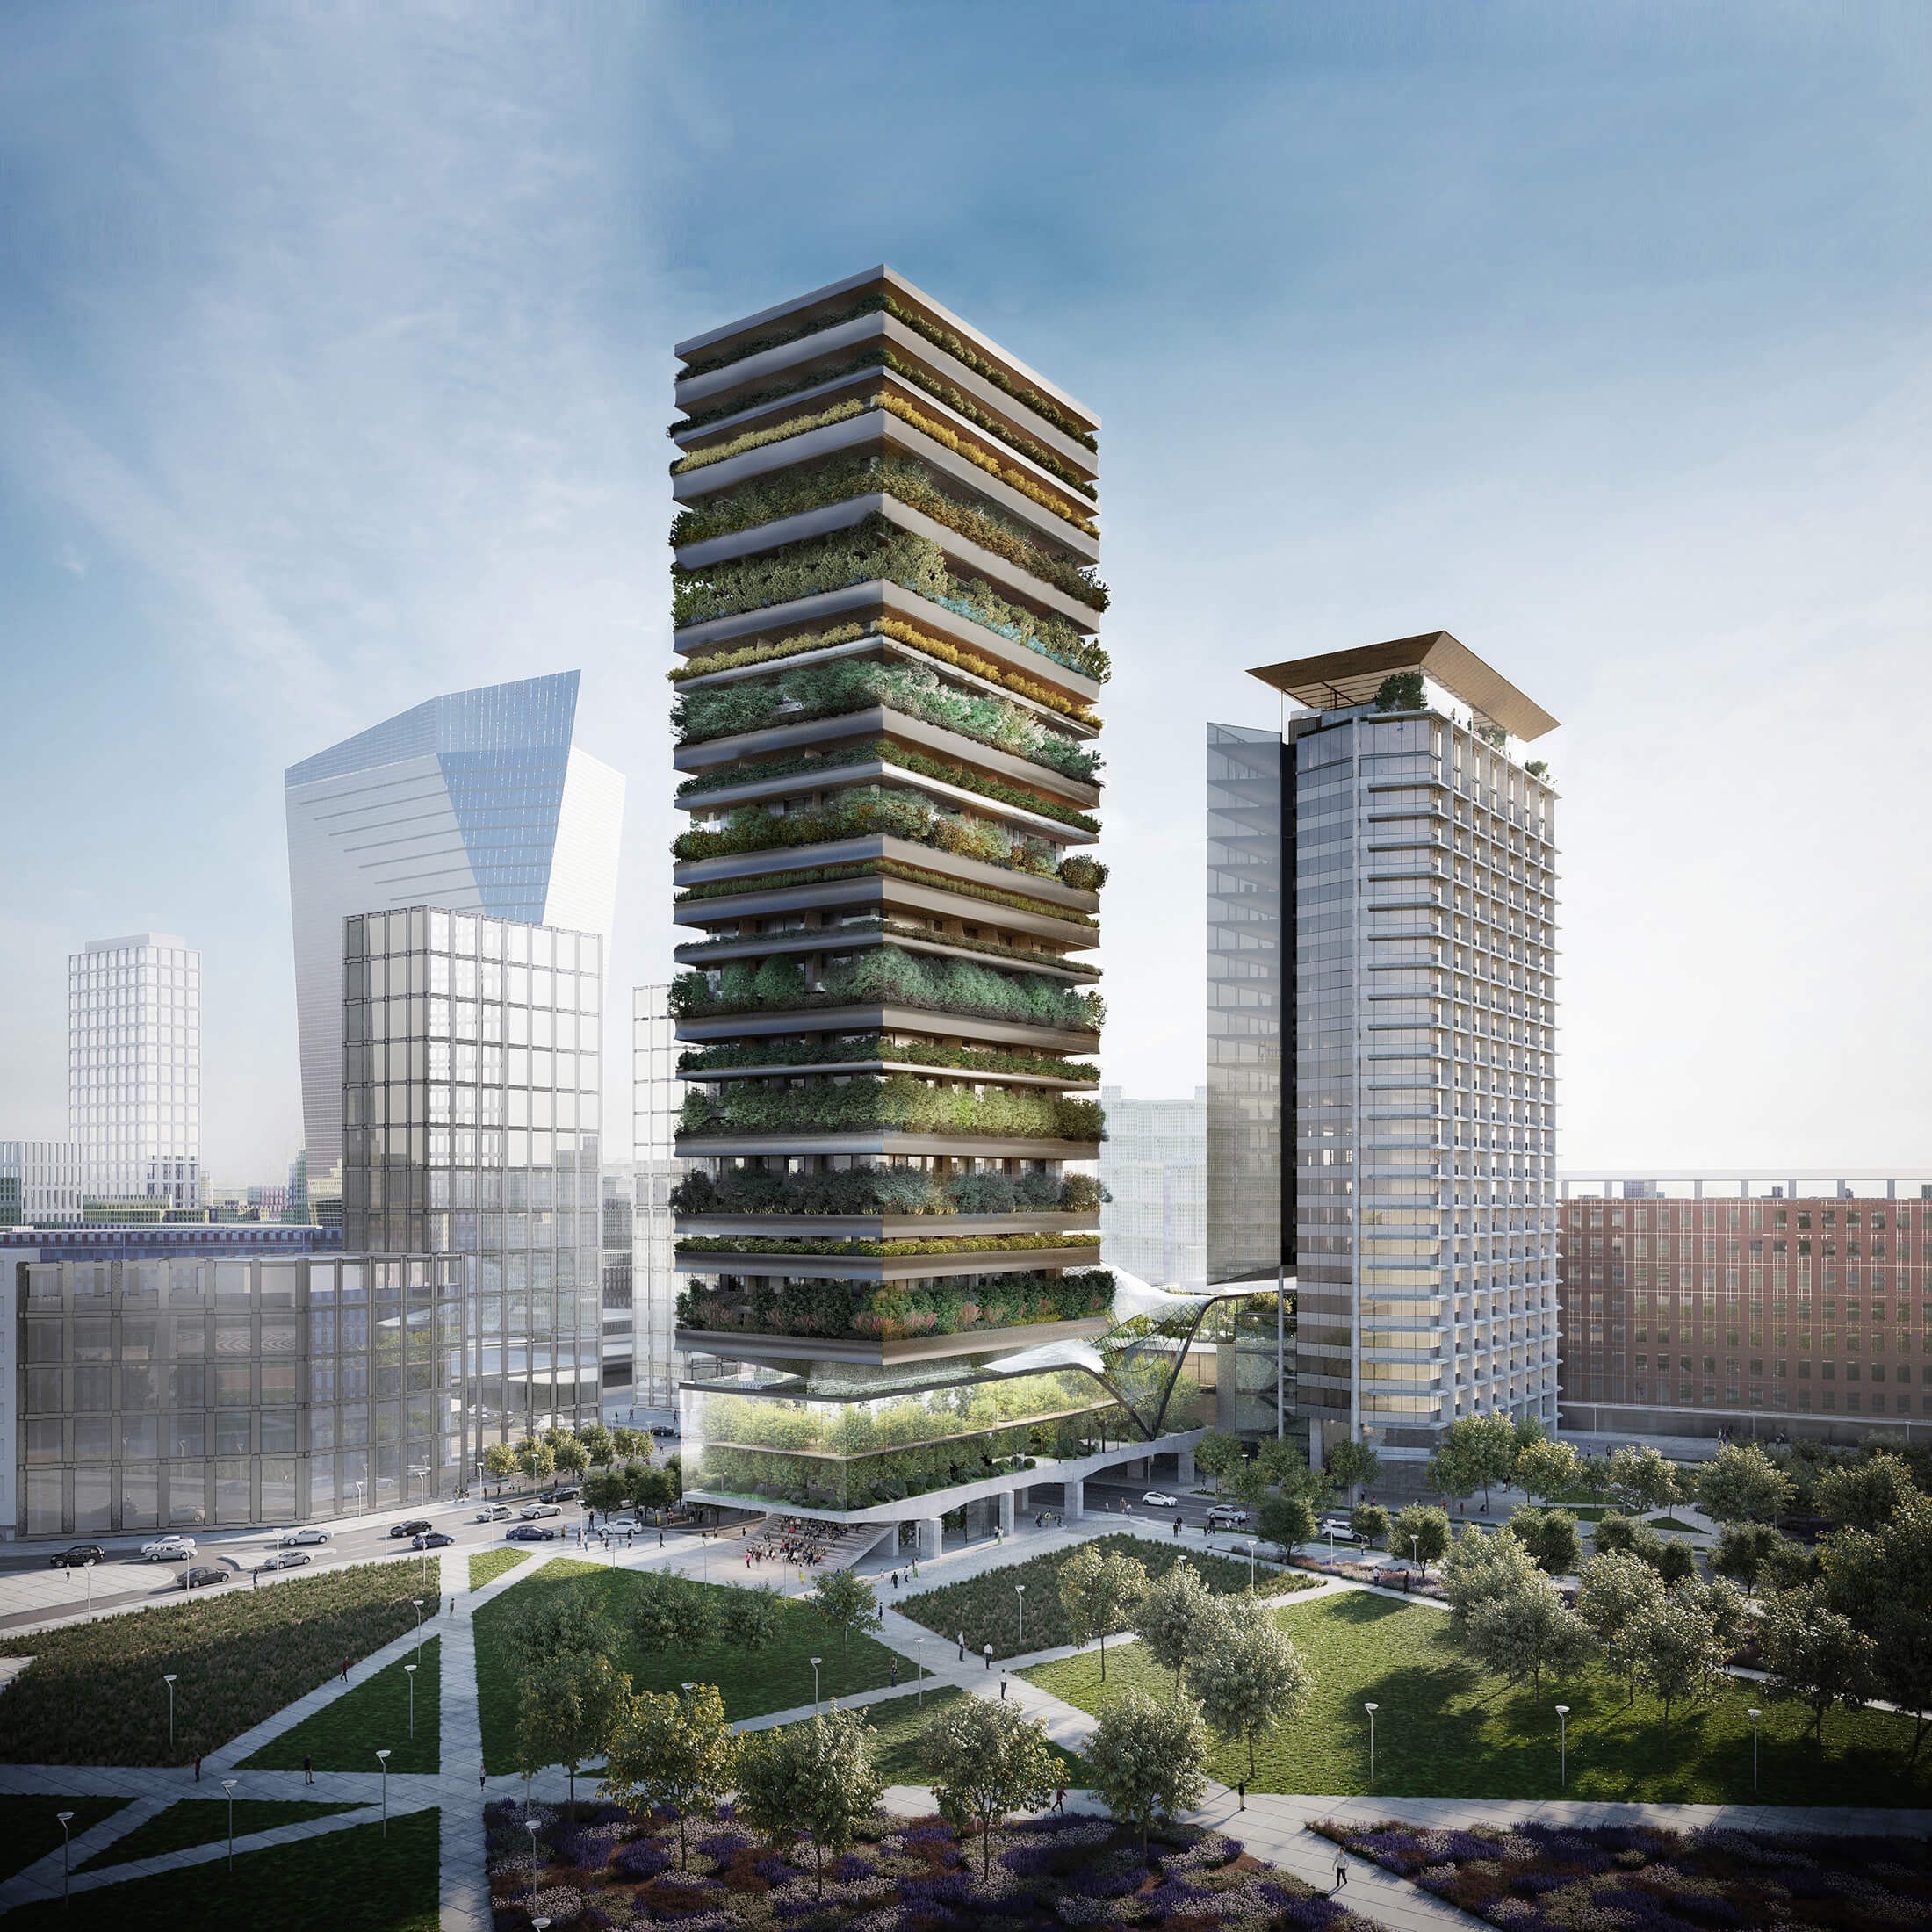 rendering of a heavily planted office tower on a landscaped site